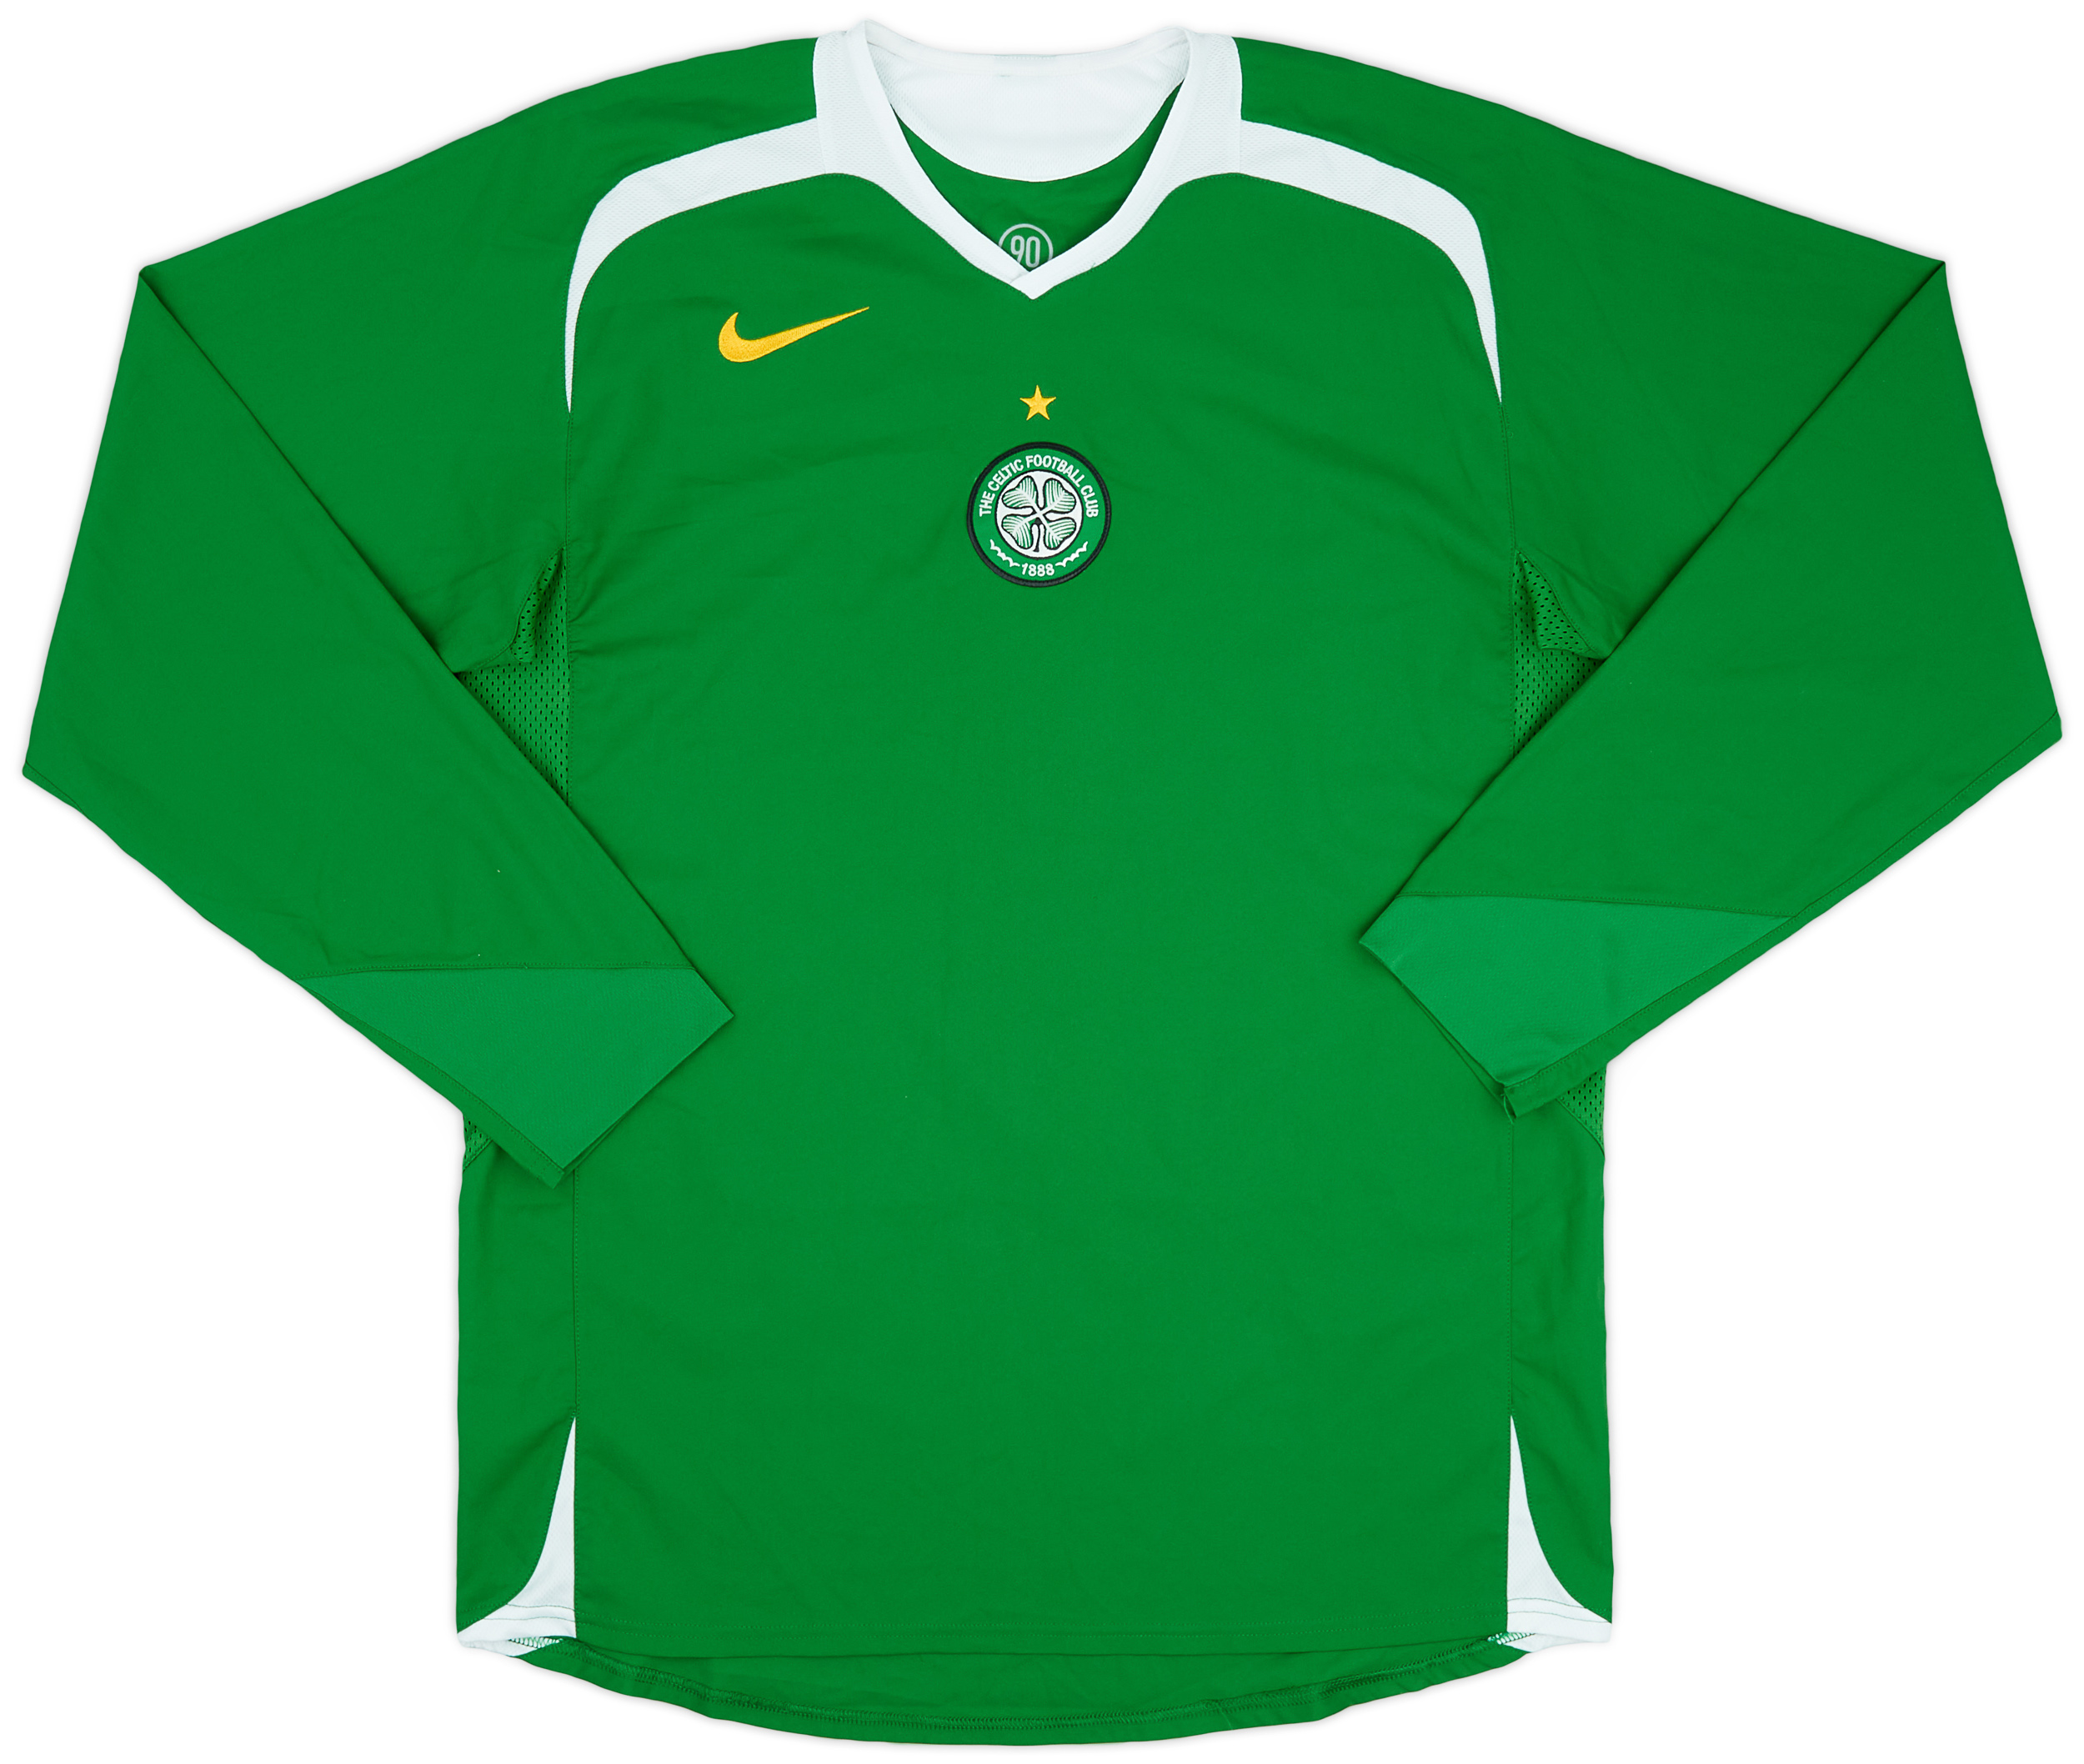 2005-06 Celtic Player Issue Away Shirt - 9/10 - ()